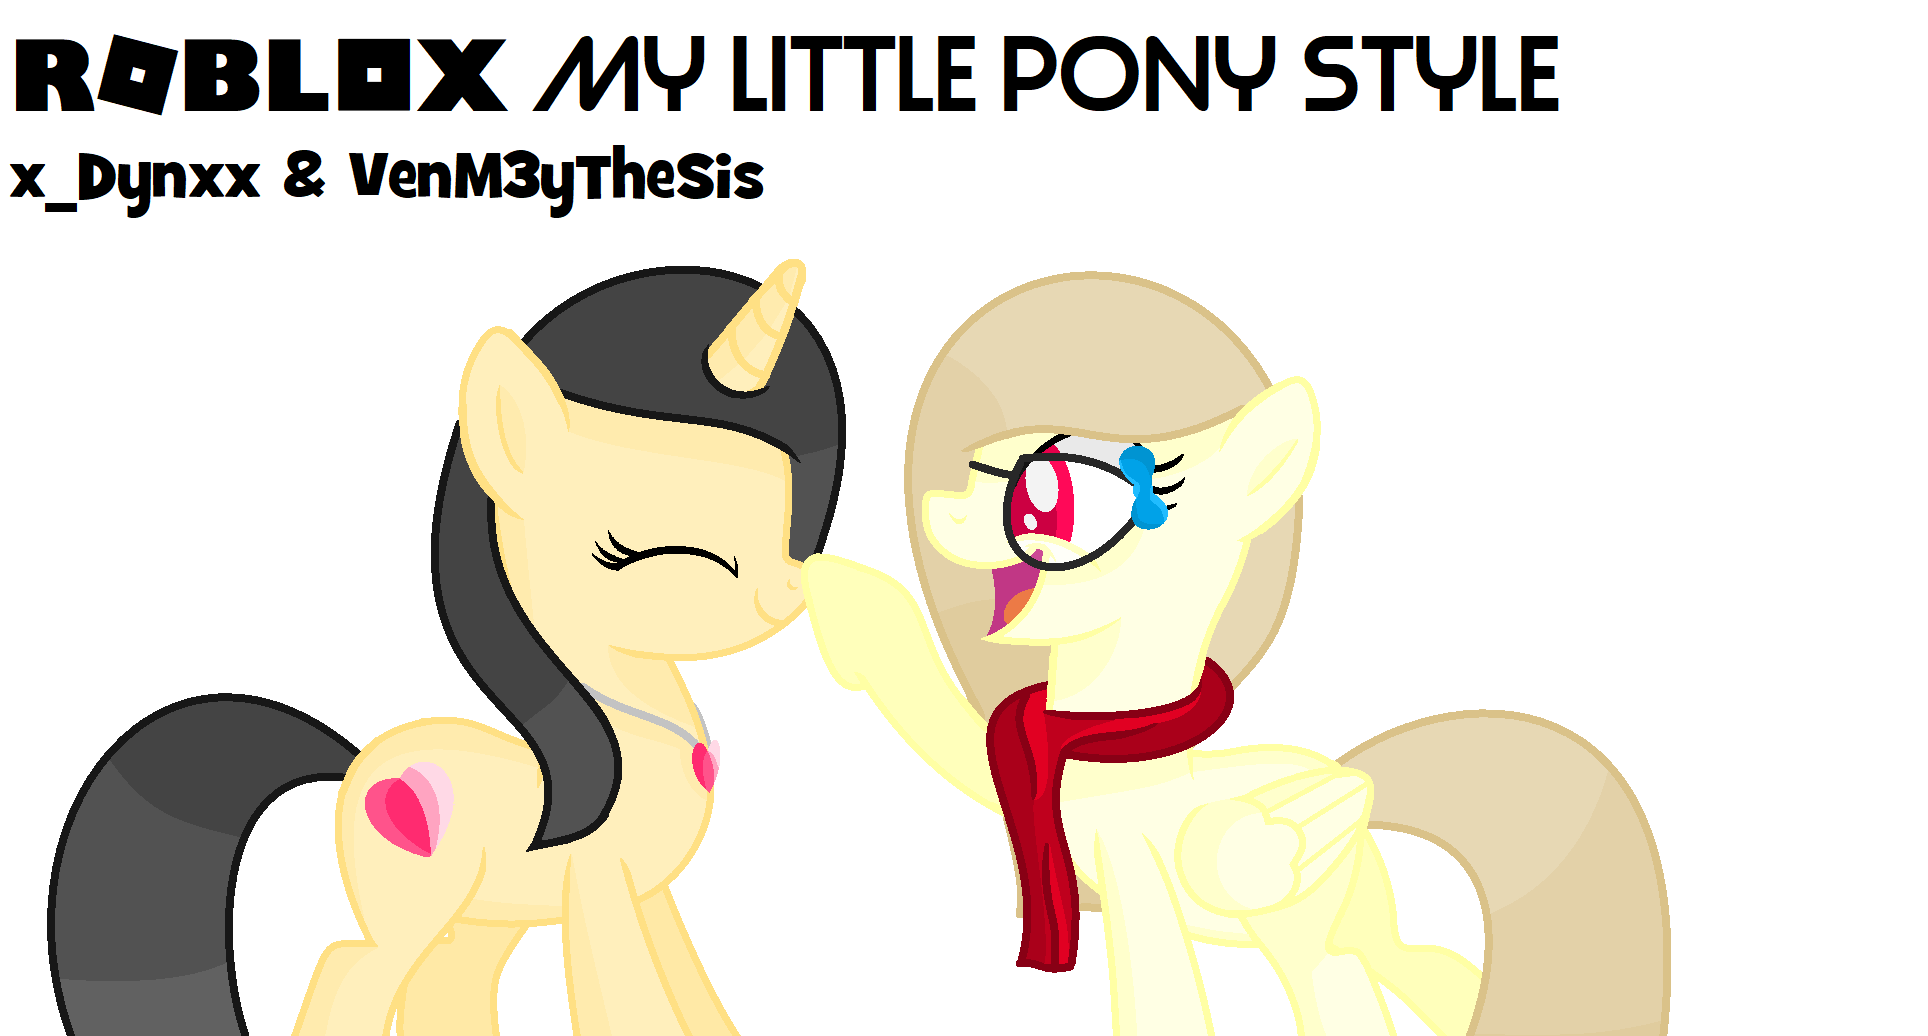 Roblox My Little Pony By Dinx Xyla On Deviantart - my little pony roblox